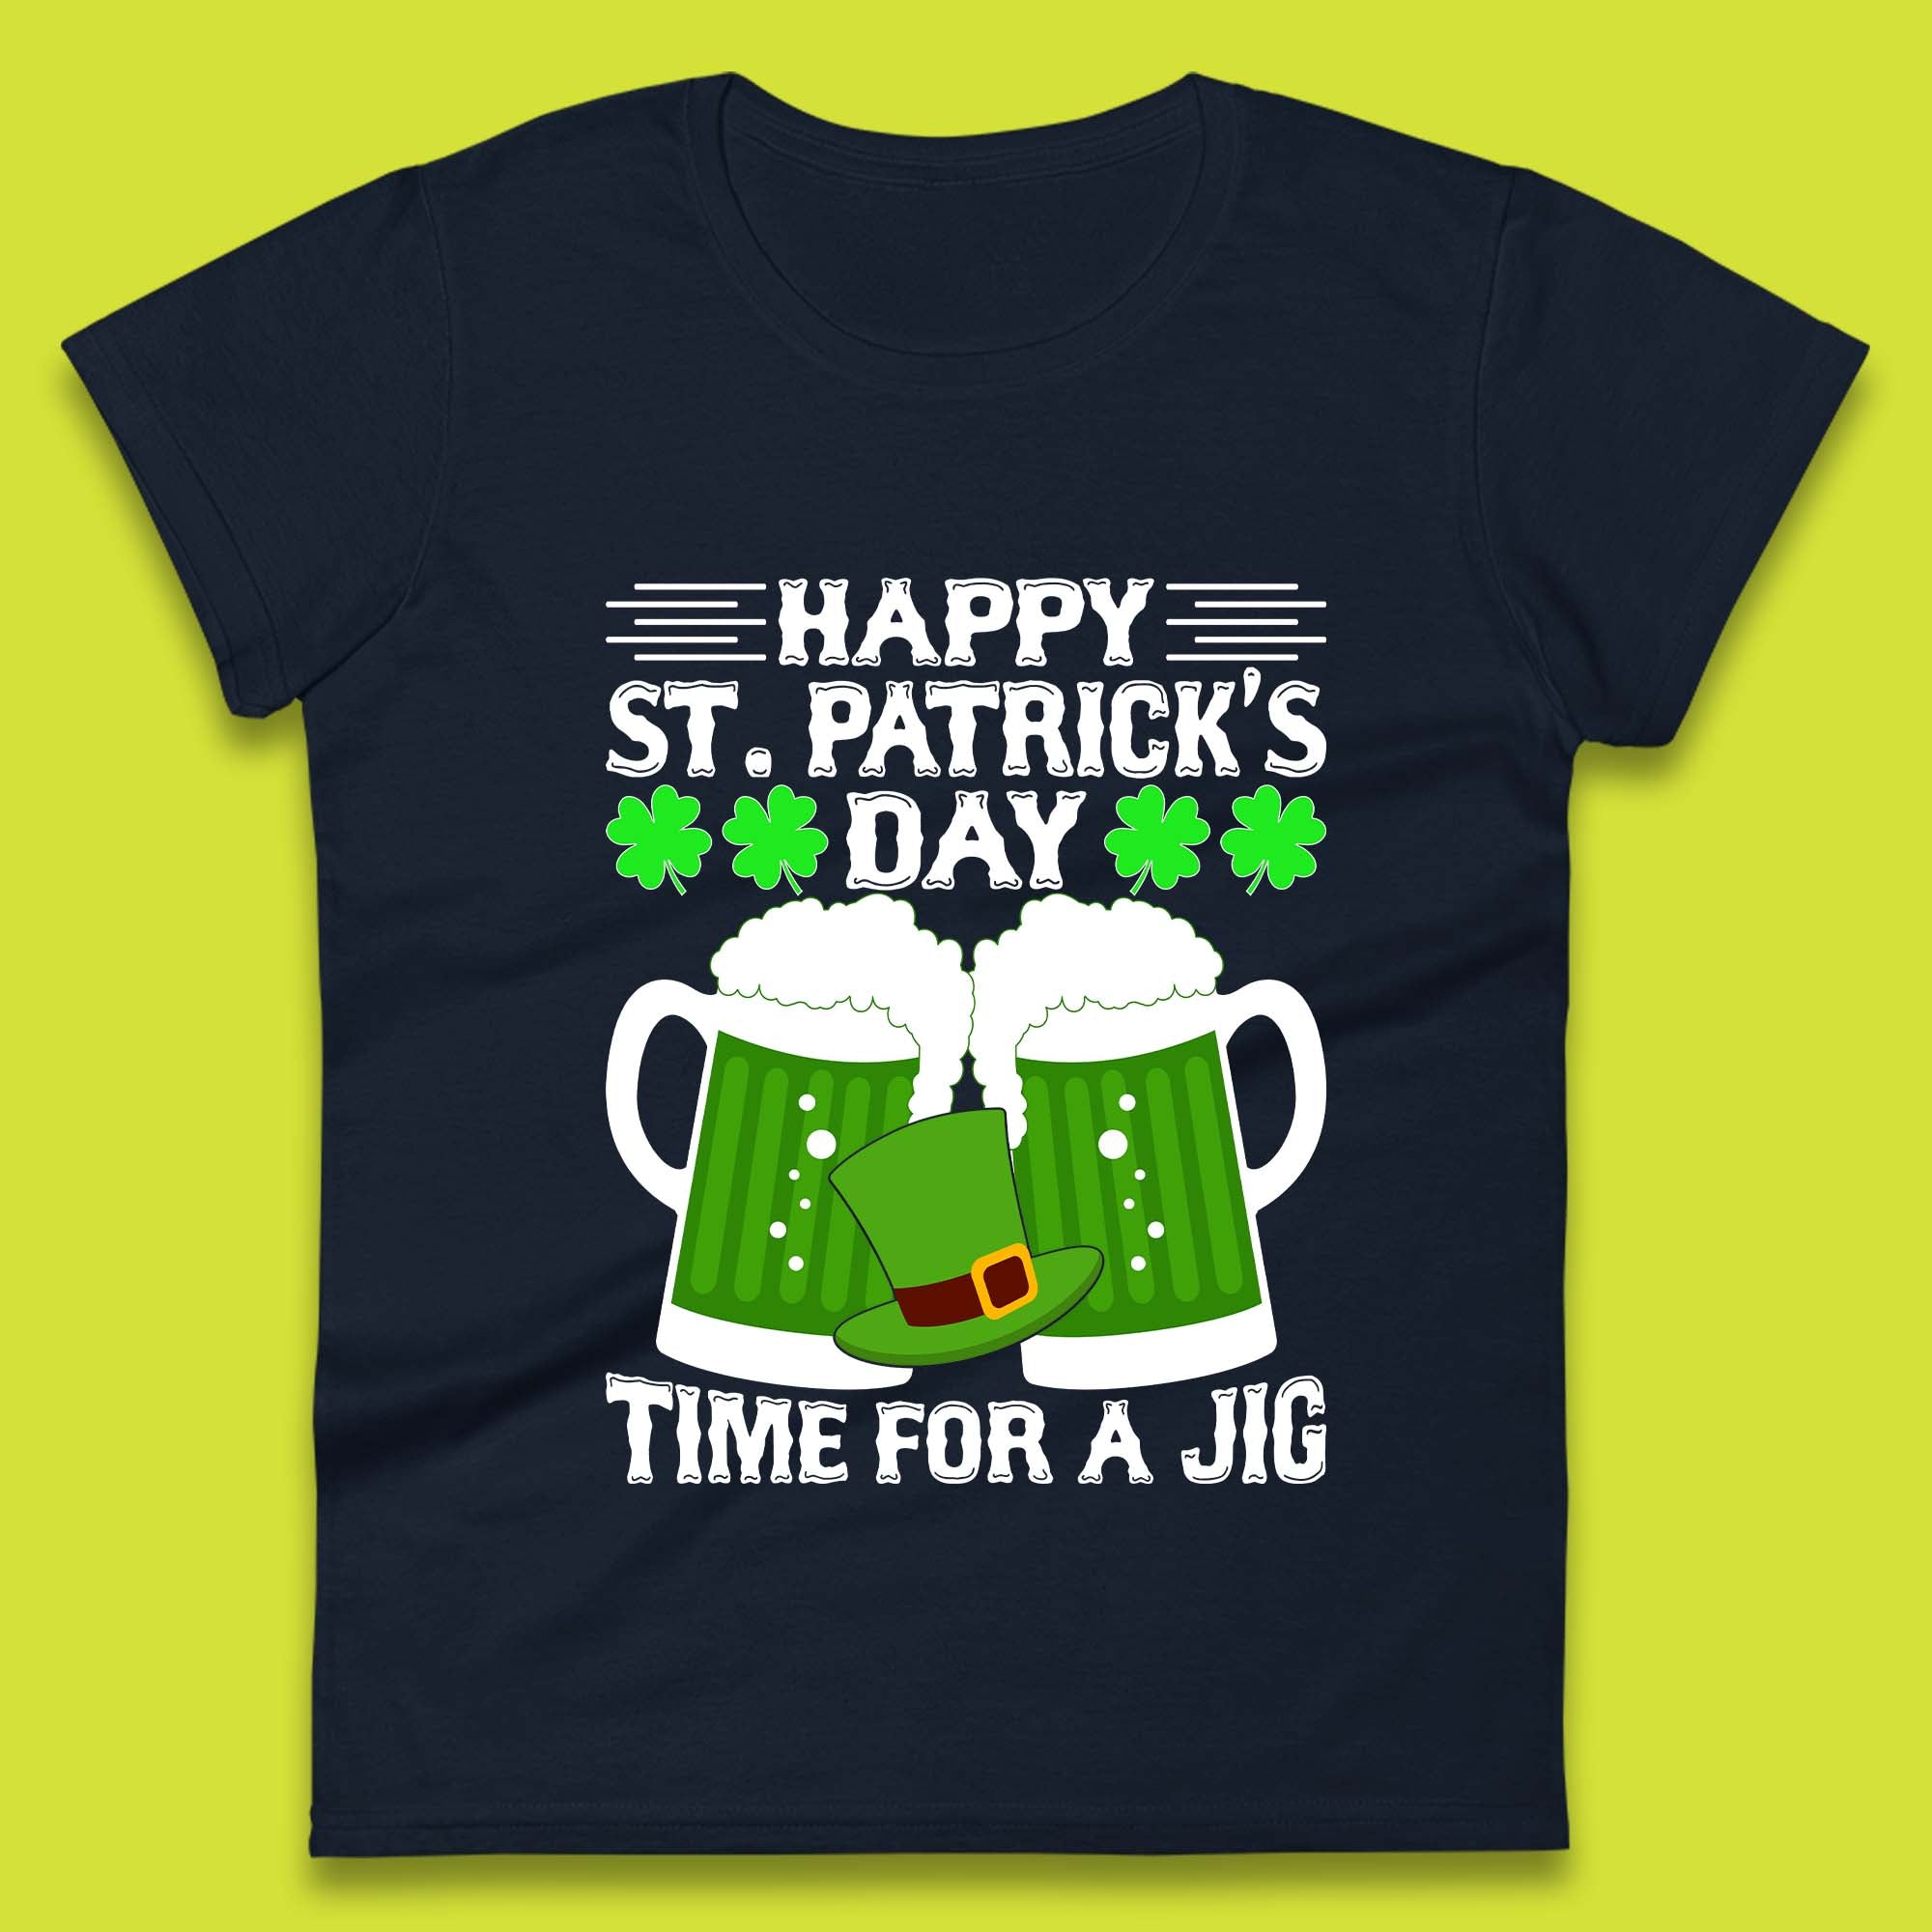 St. Patrick's Day Time For A Jig Womens T-Shirt